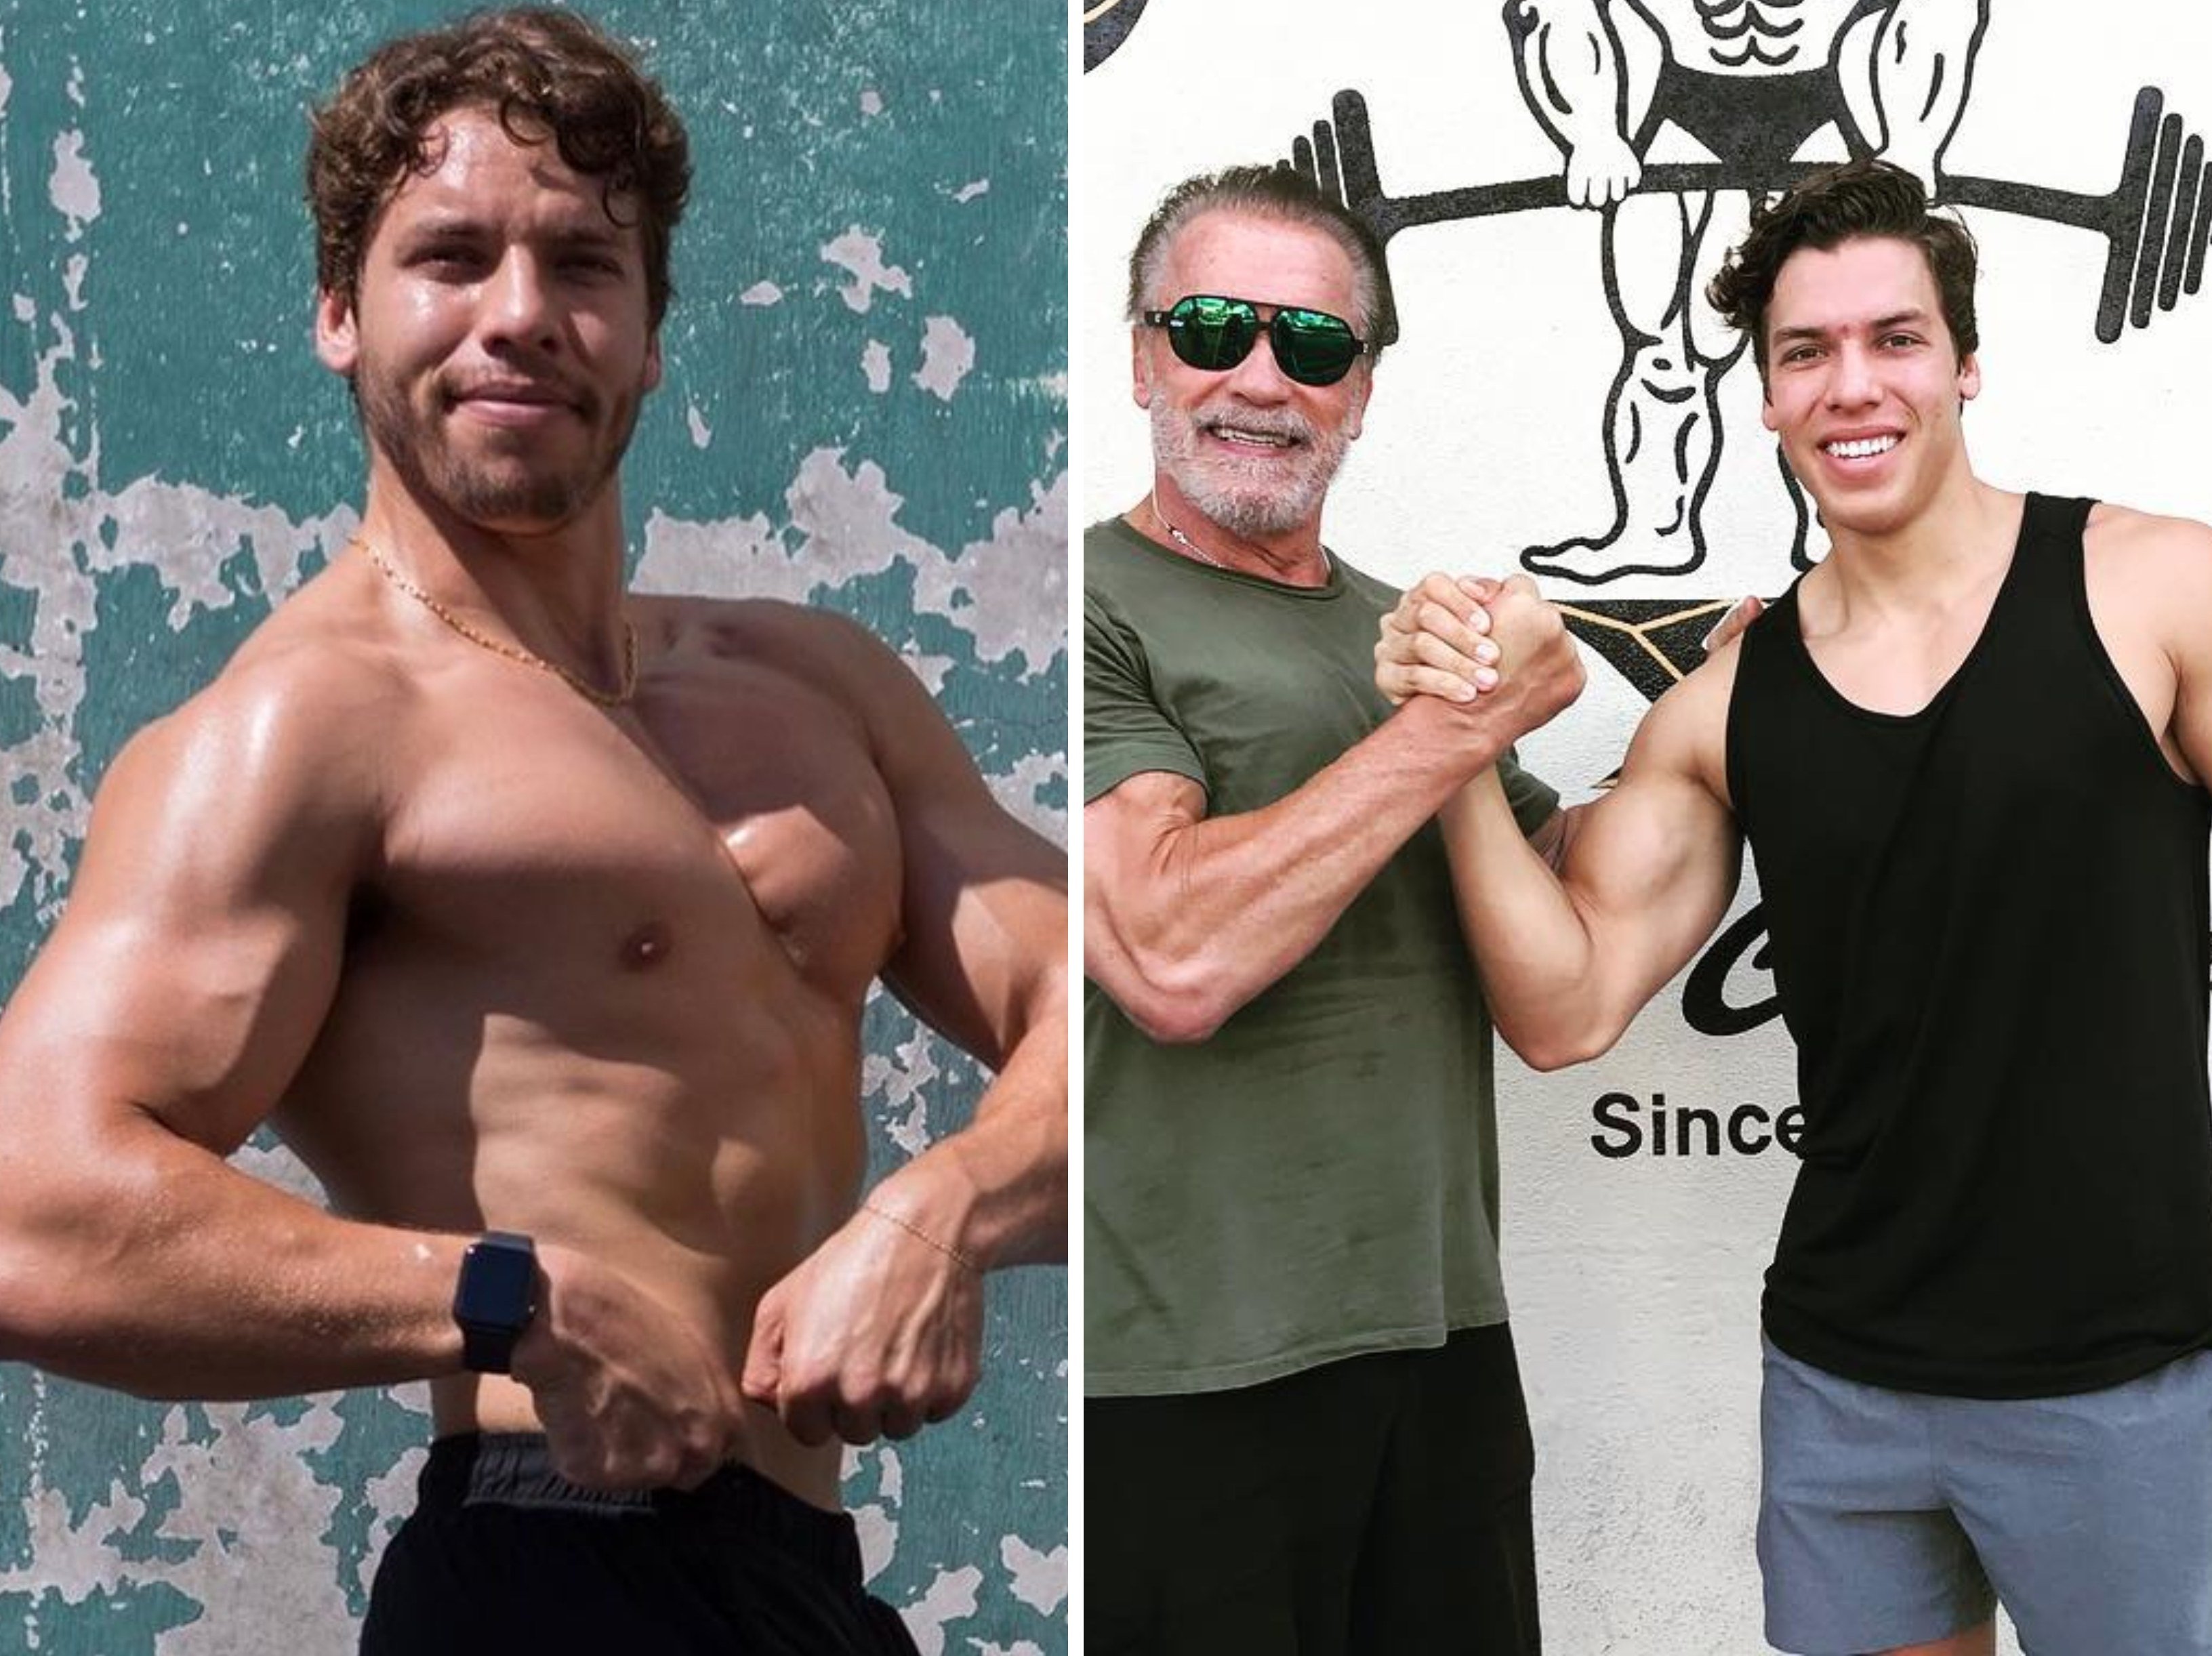 Joe Baena, the son of Arnold Schwarzenegger, didn’t take his dad’s name out of respect for his mum. Photo: @joebaena/Instagram